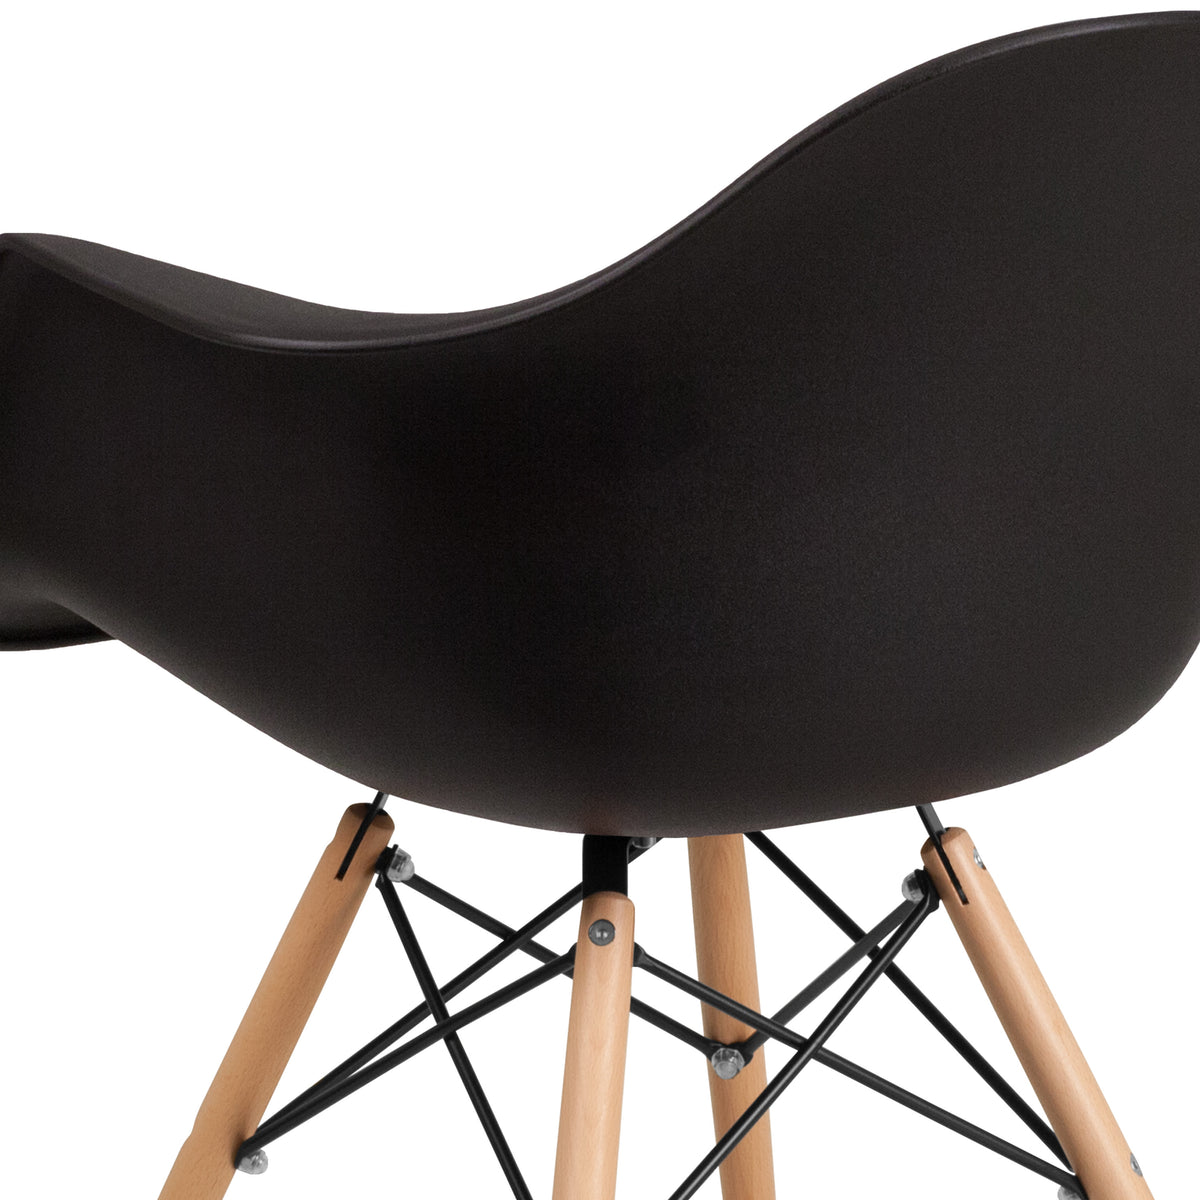 Black |#| Black Plastic Chair with Arms and Wooden Legs - Accent & Side Chair